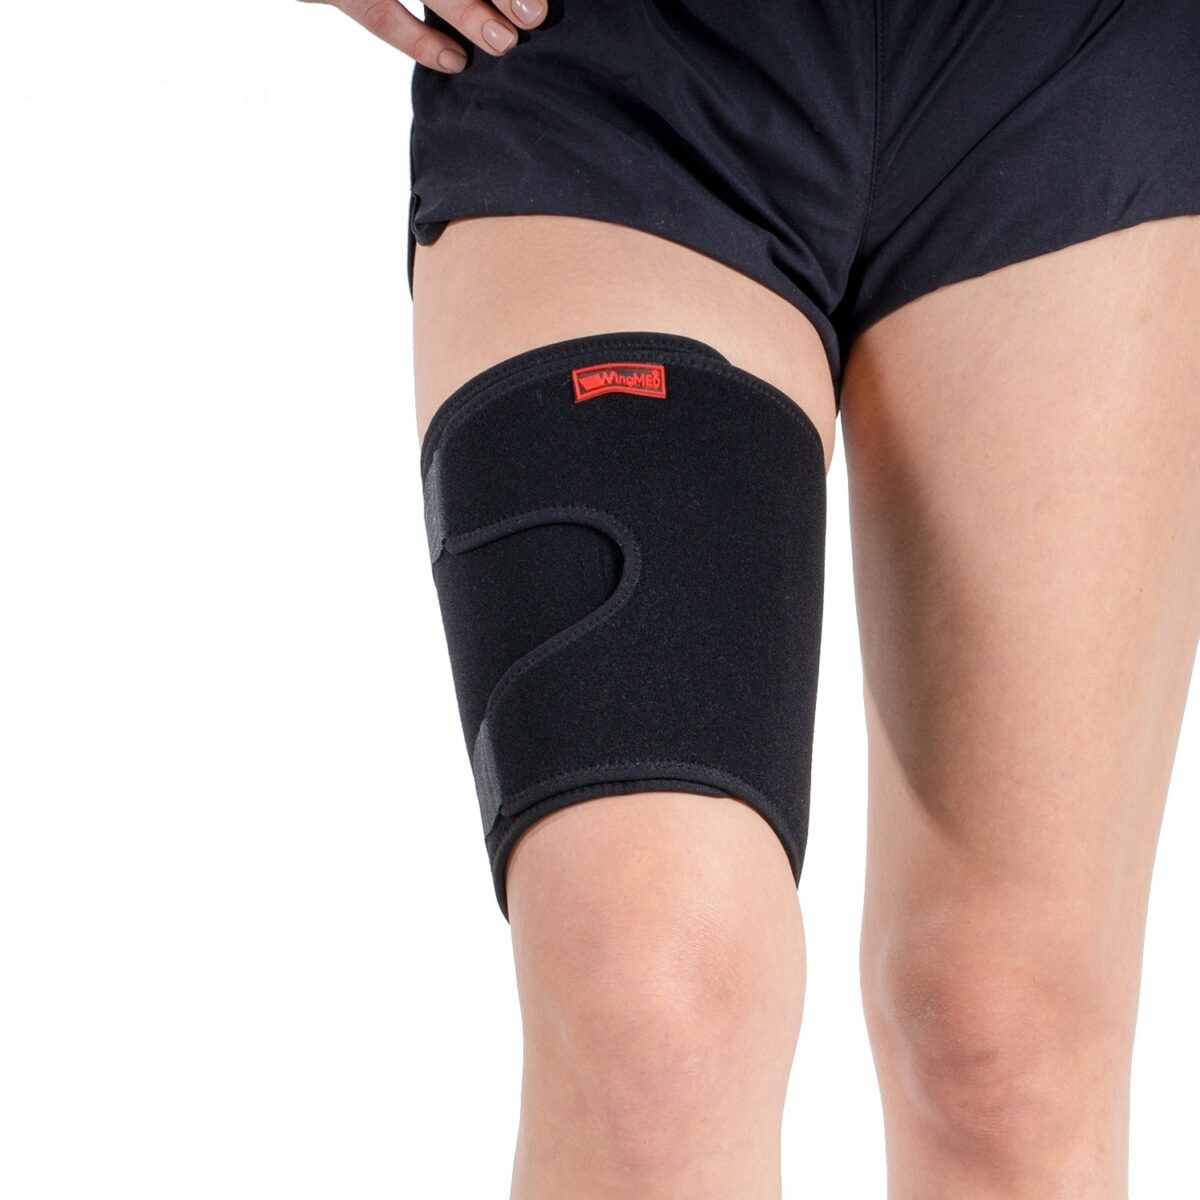 wingmed orthopedic equipments W522 thigh support 19